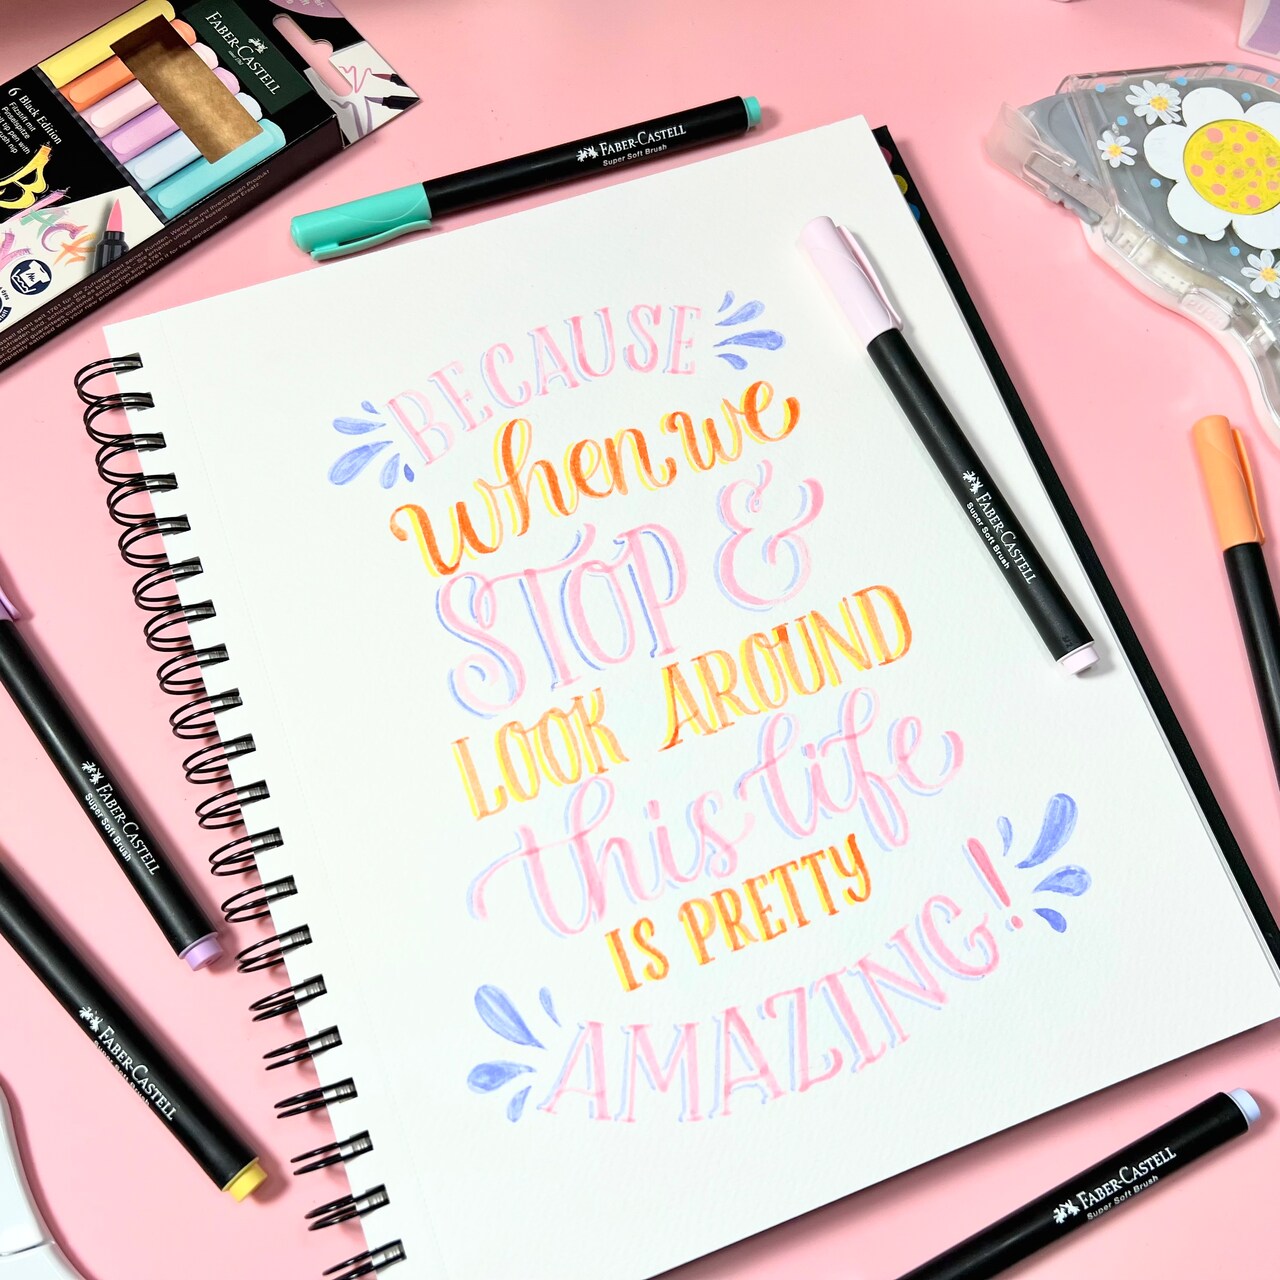 Brush Lettering with with Soft Black Edition Pens from Faber-Castell®